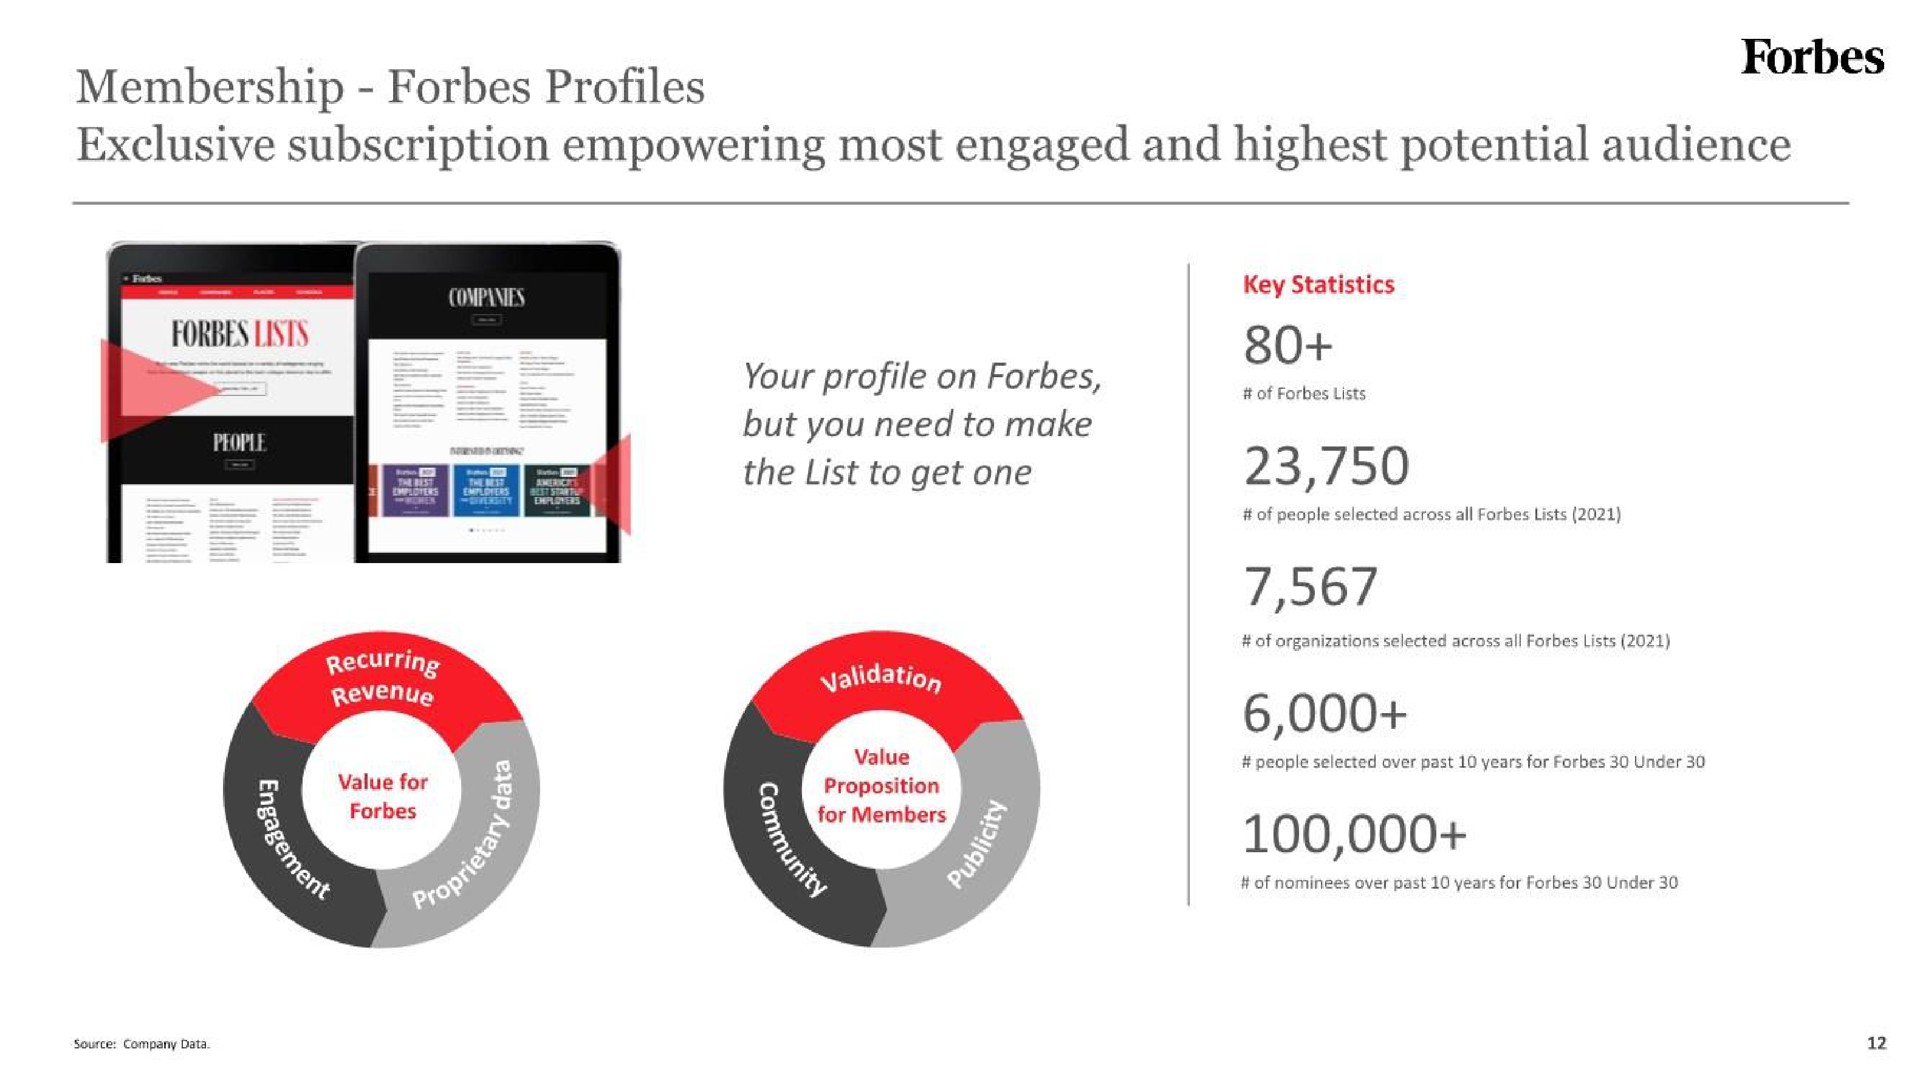 membership profiles exclusive subscription empowering most engaged and highest potential audience lists | Forbes